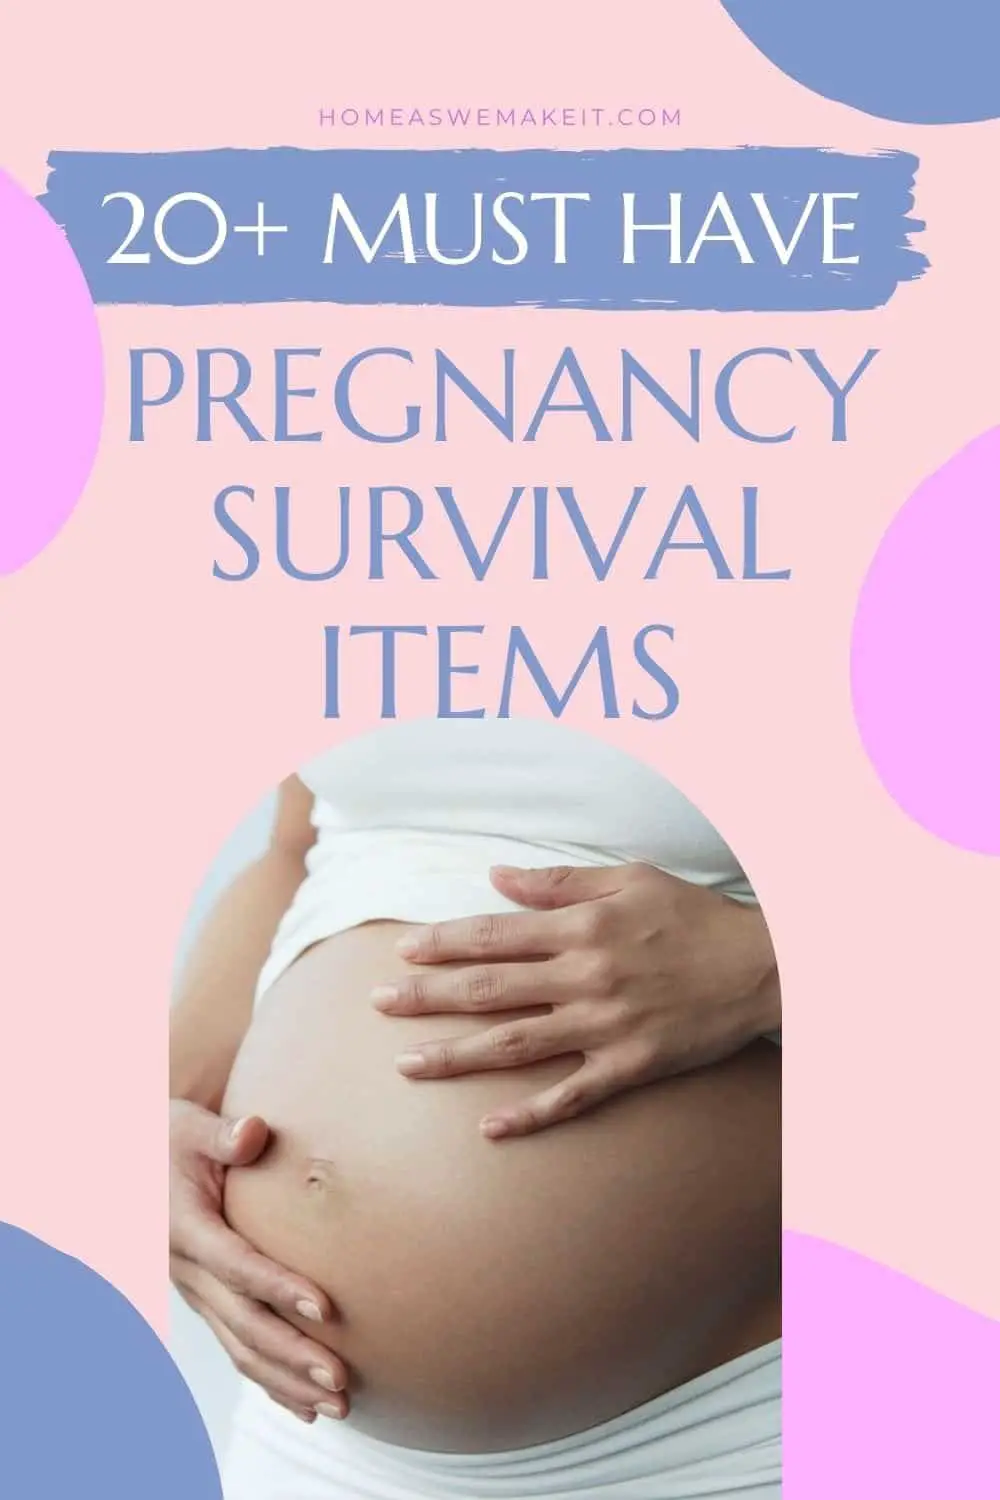 Pregnancy Care Package and Survival Kit Ideas